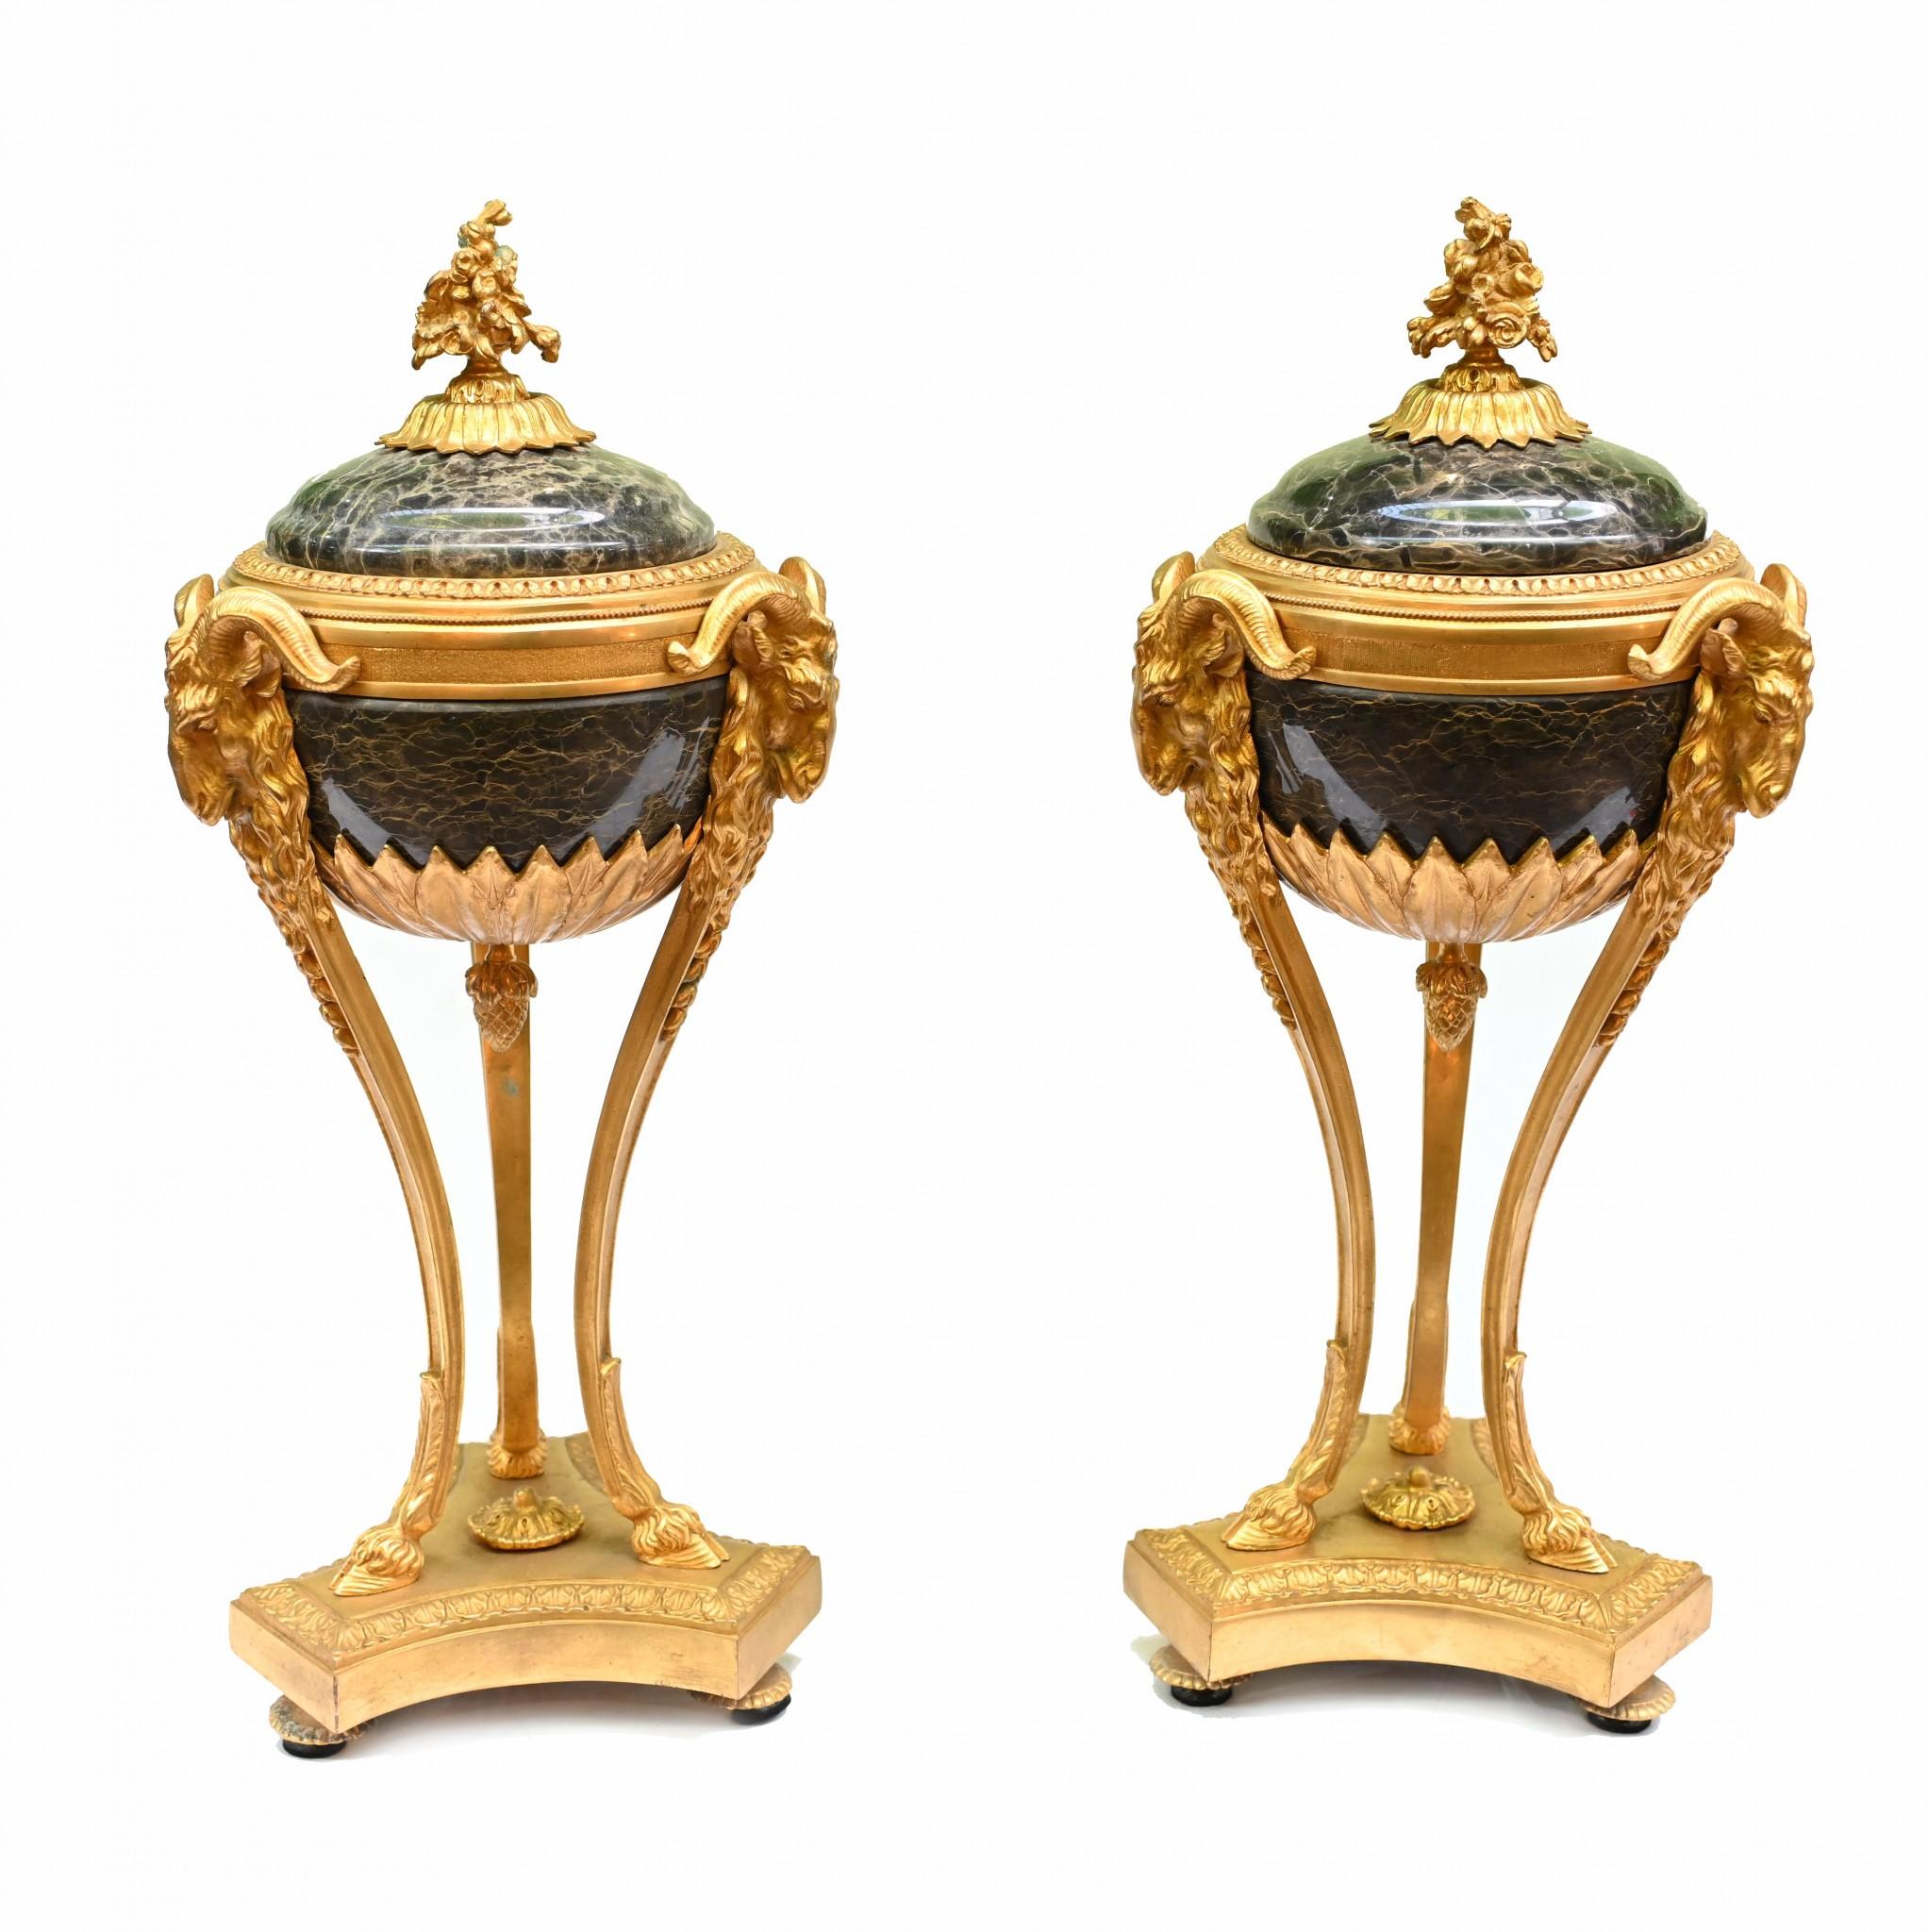 Stunning pair of French marble cassolettes on gilt stands
Such a great look to this highly decorative pair which are quite striking
We date these to circa 1880 and the look is high Empire, perfect for contemporary interiors
The marble - vert maurin